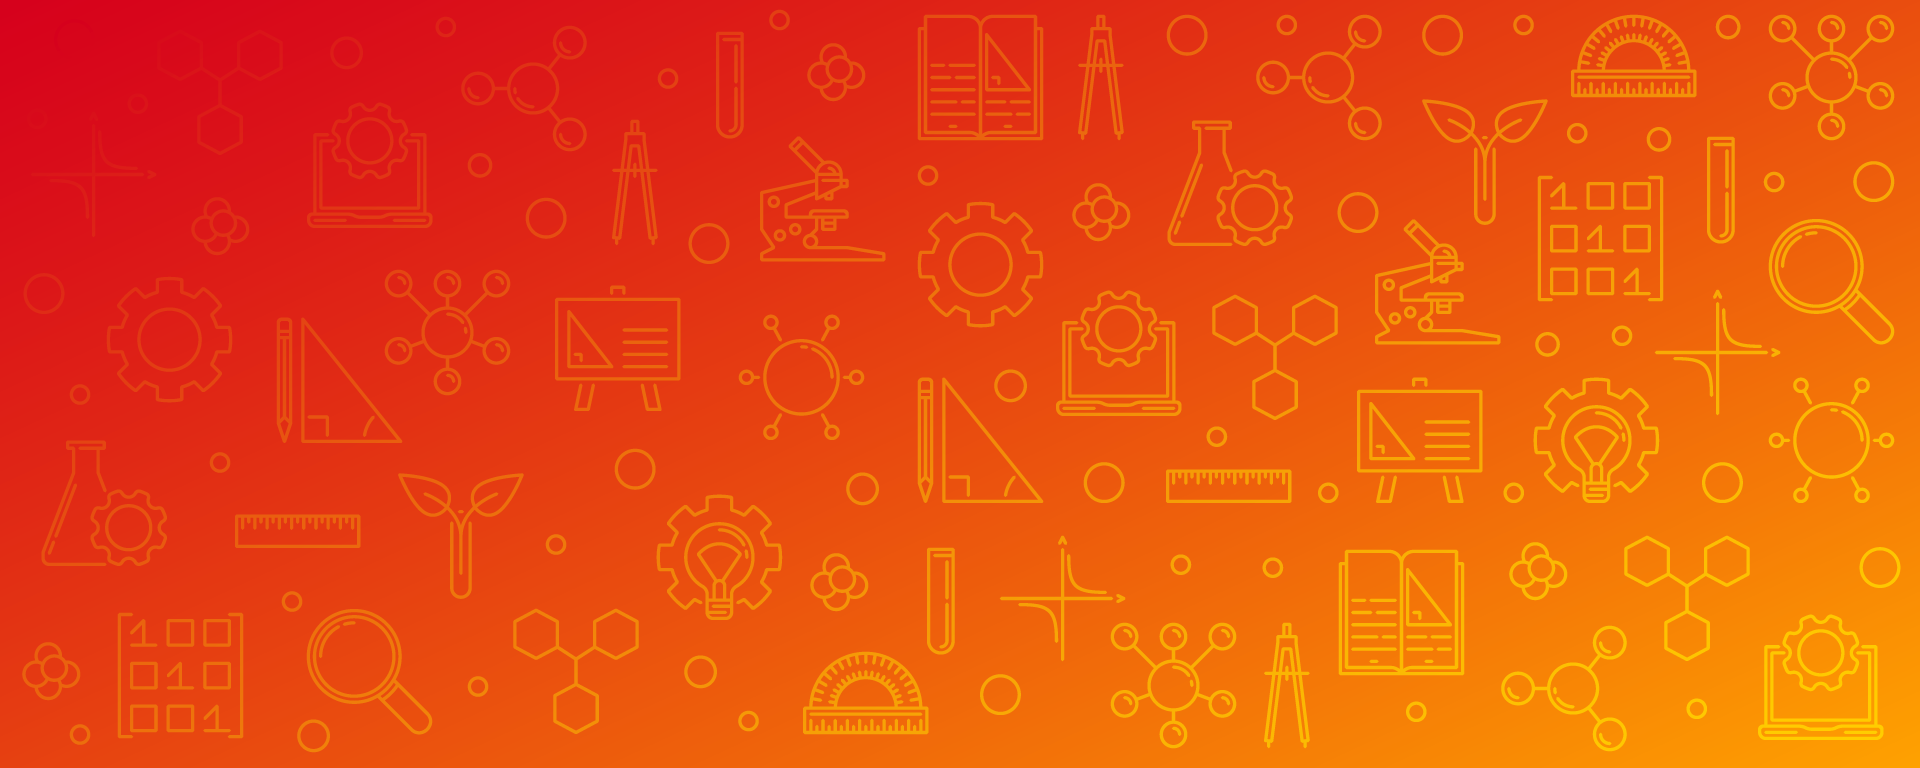 Red and yellow background with STEM-related icons on top